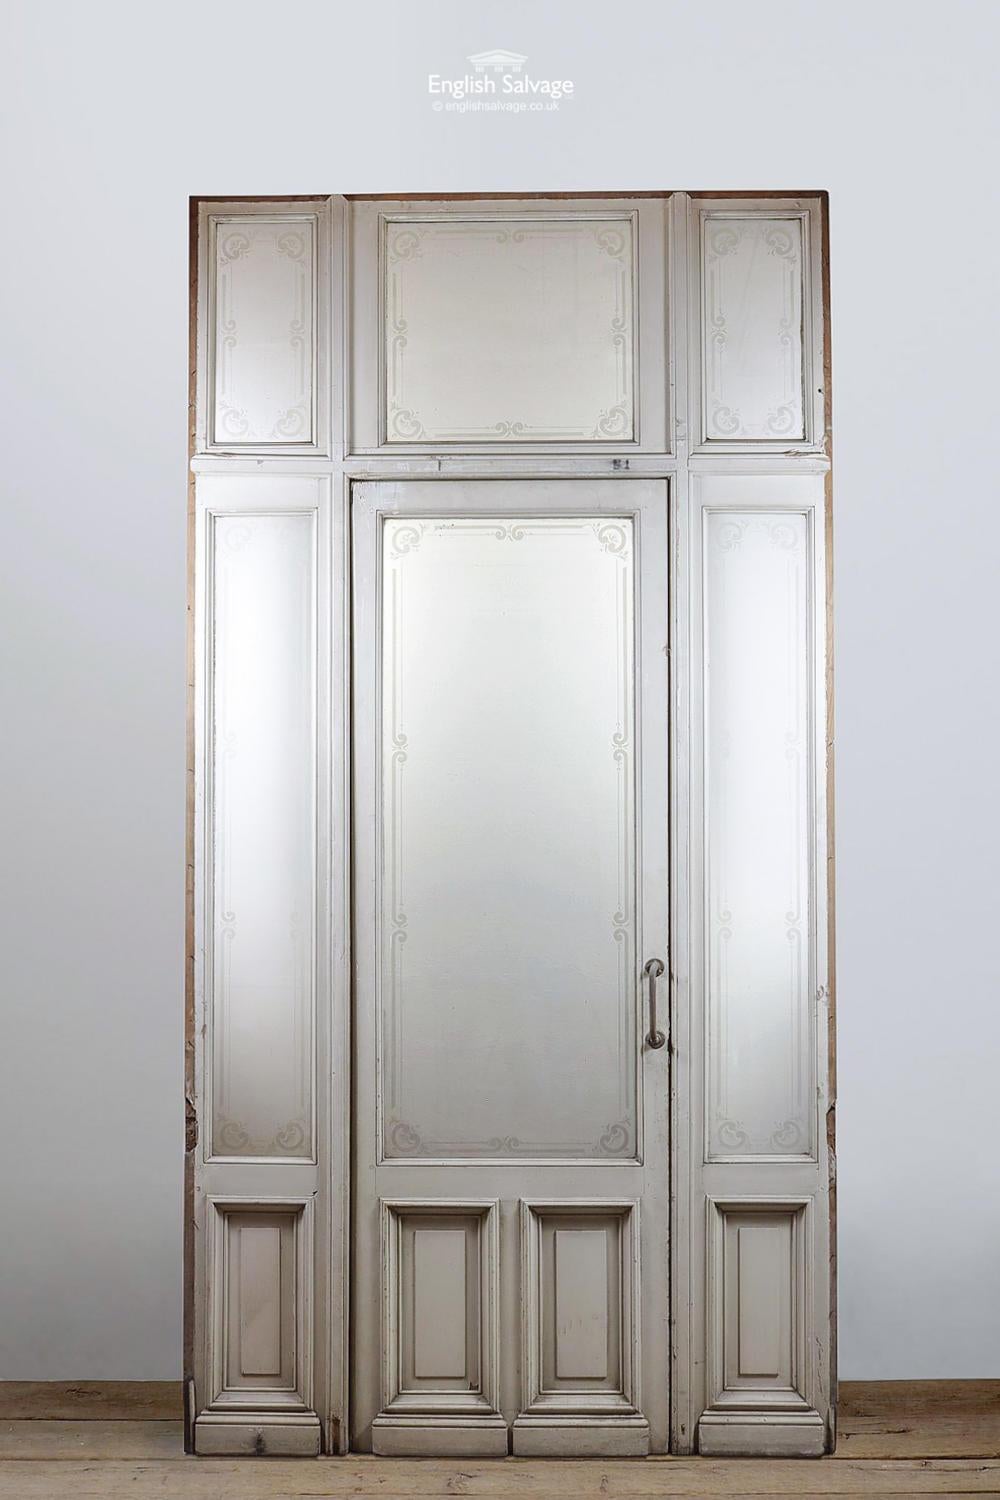 Reclaimed single door with a large etched frosted glass panel above two small raised and moulded panels. The door has a matching large glazed frame with fanlights. The overall size is below, the door itself is 85.3cm wide x 262.5cm high and is able